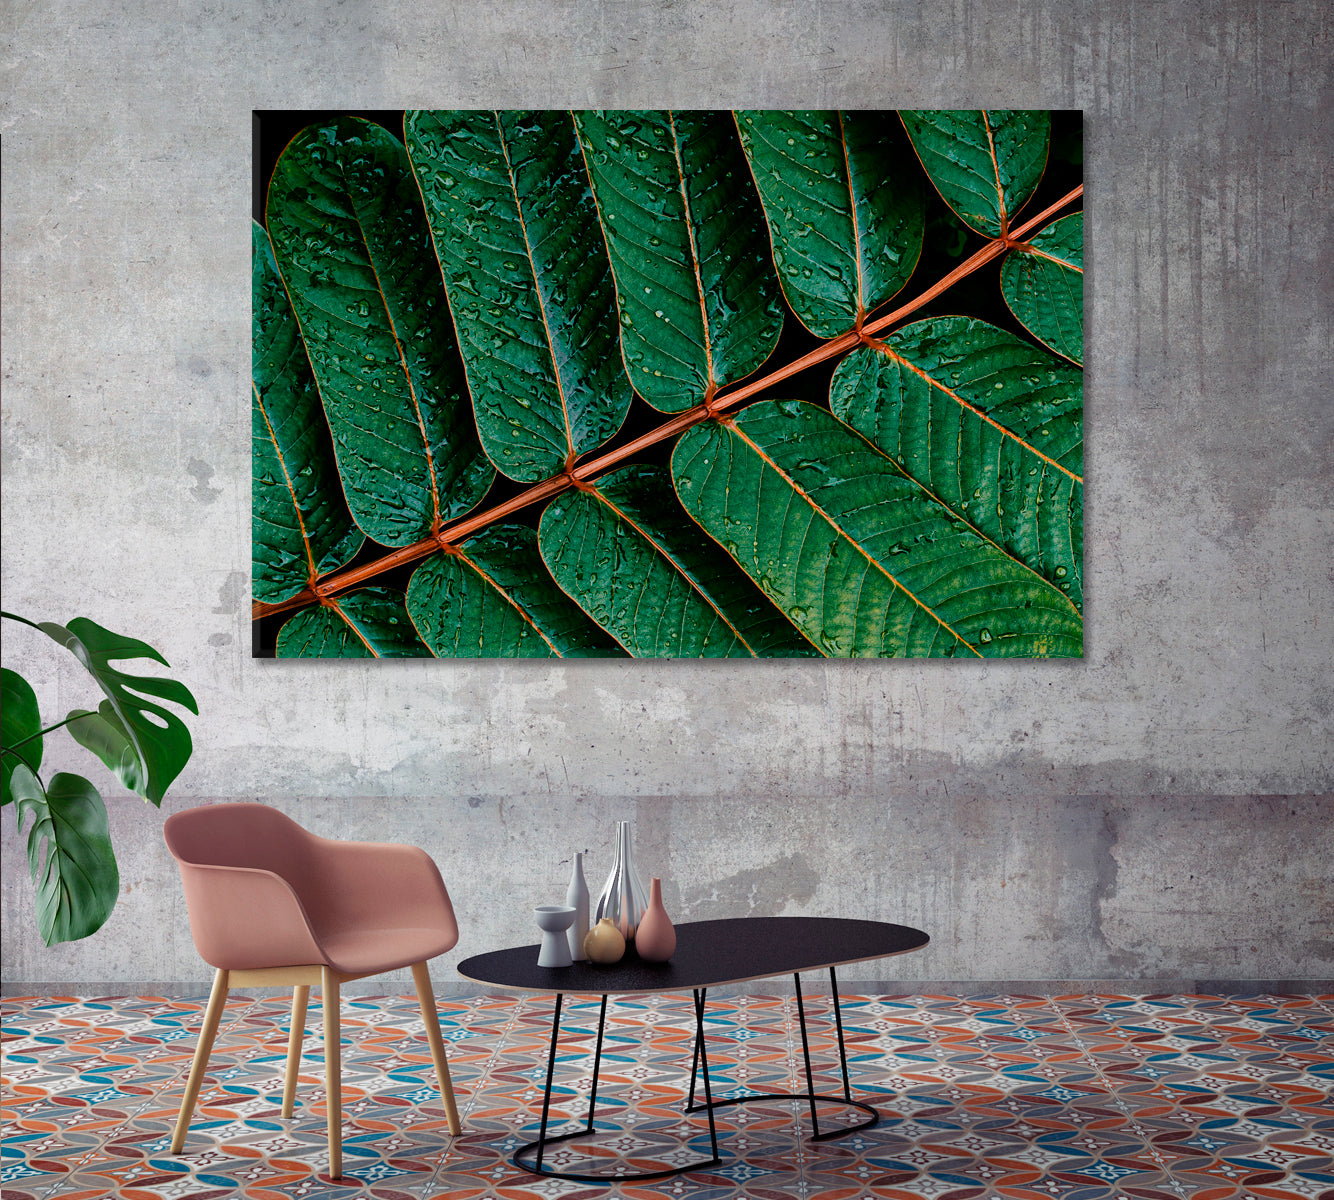 Water Drops on Tropical Green Leaves Canvas Print-Canvas Print-CetArt-1 Panel-24x16 inches-CetArt